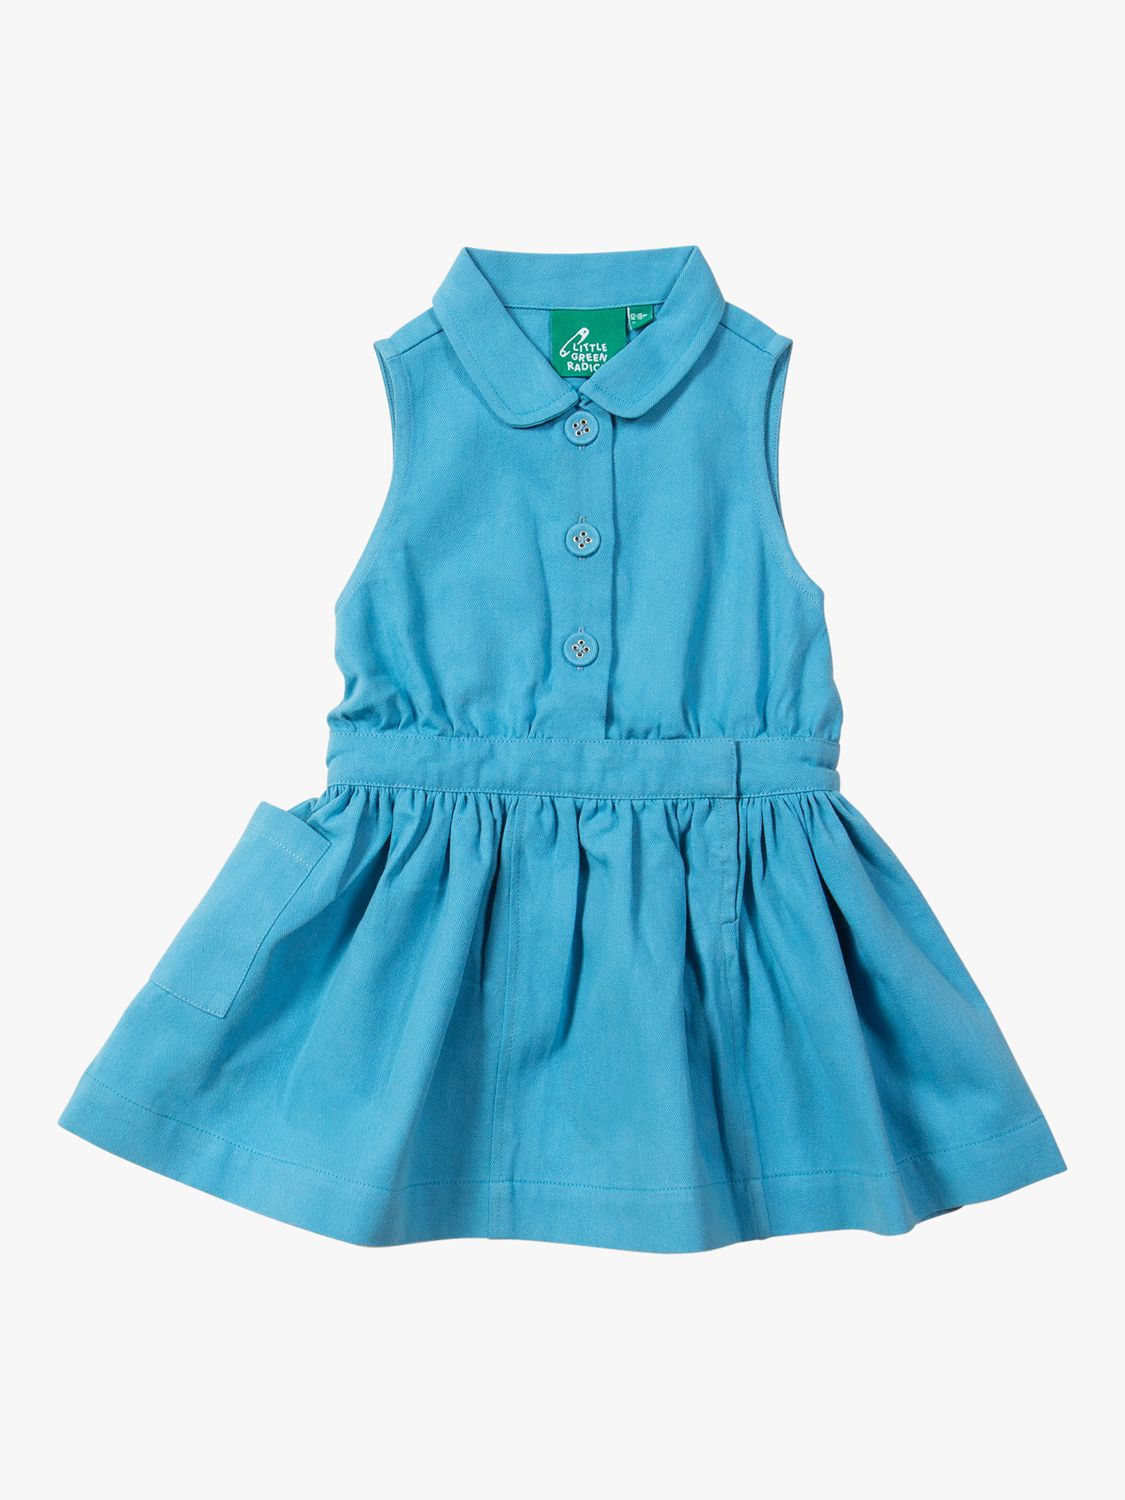 Little Green Radicals Baby Organic Cotton Pinafore Button Dress, Blue Moon Solid, 4-5 years